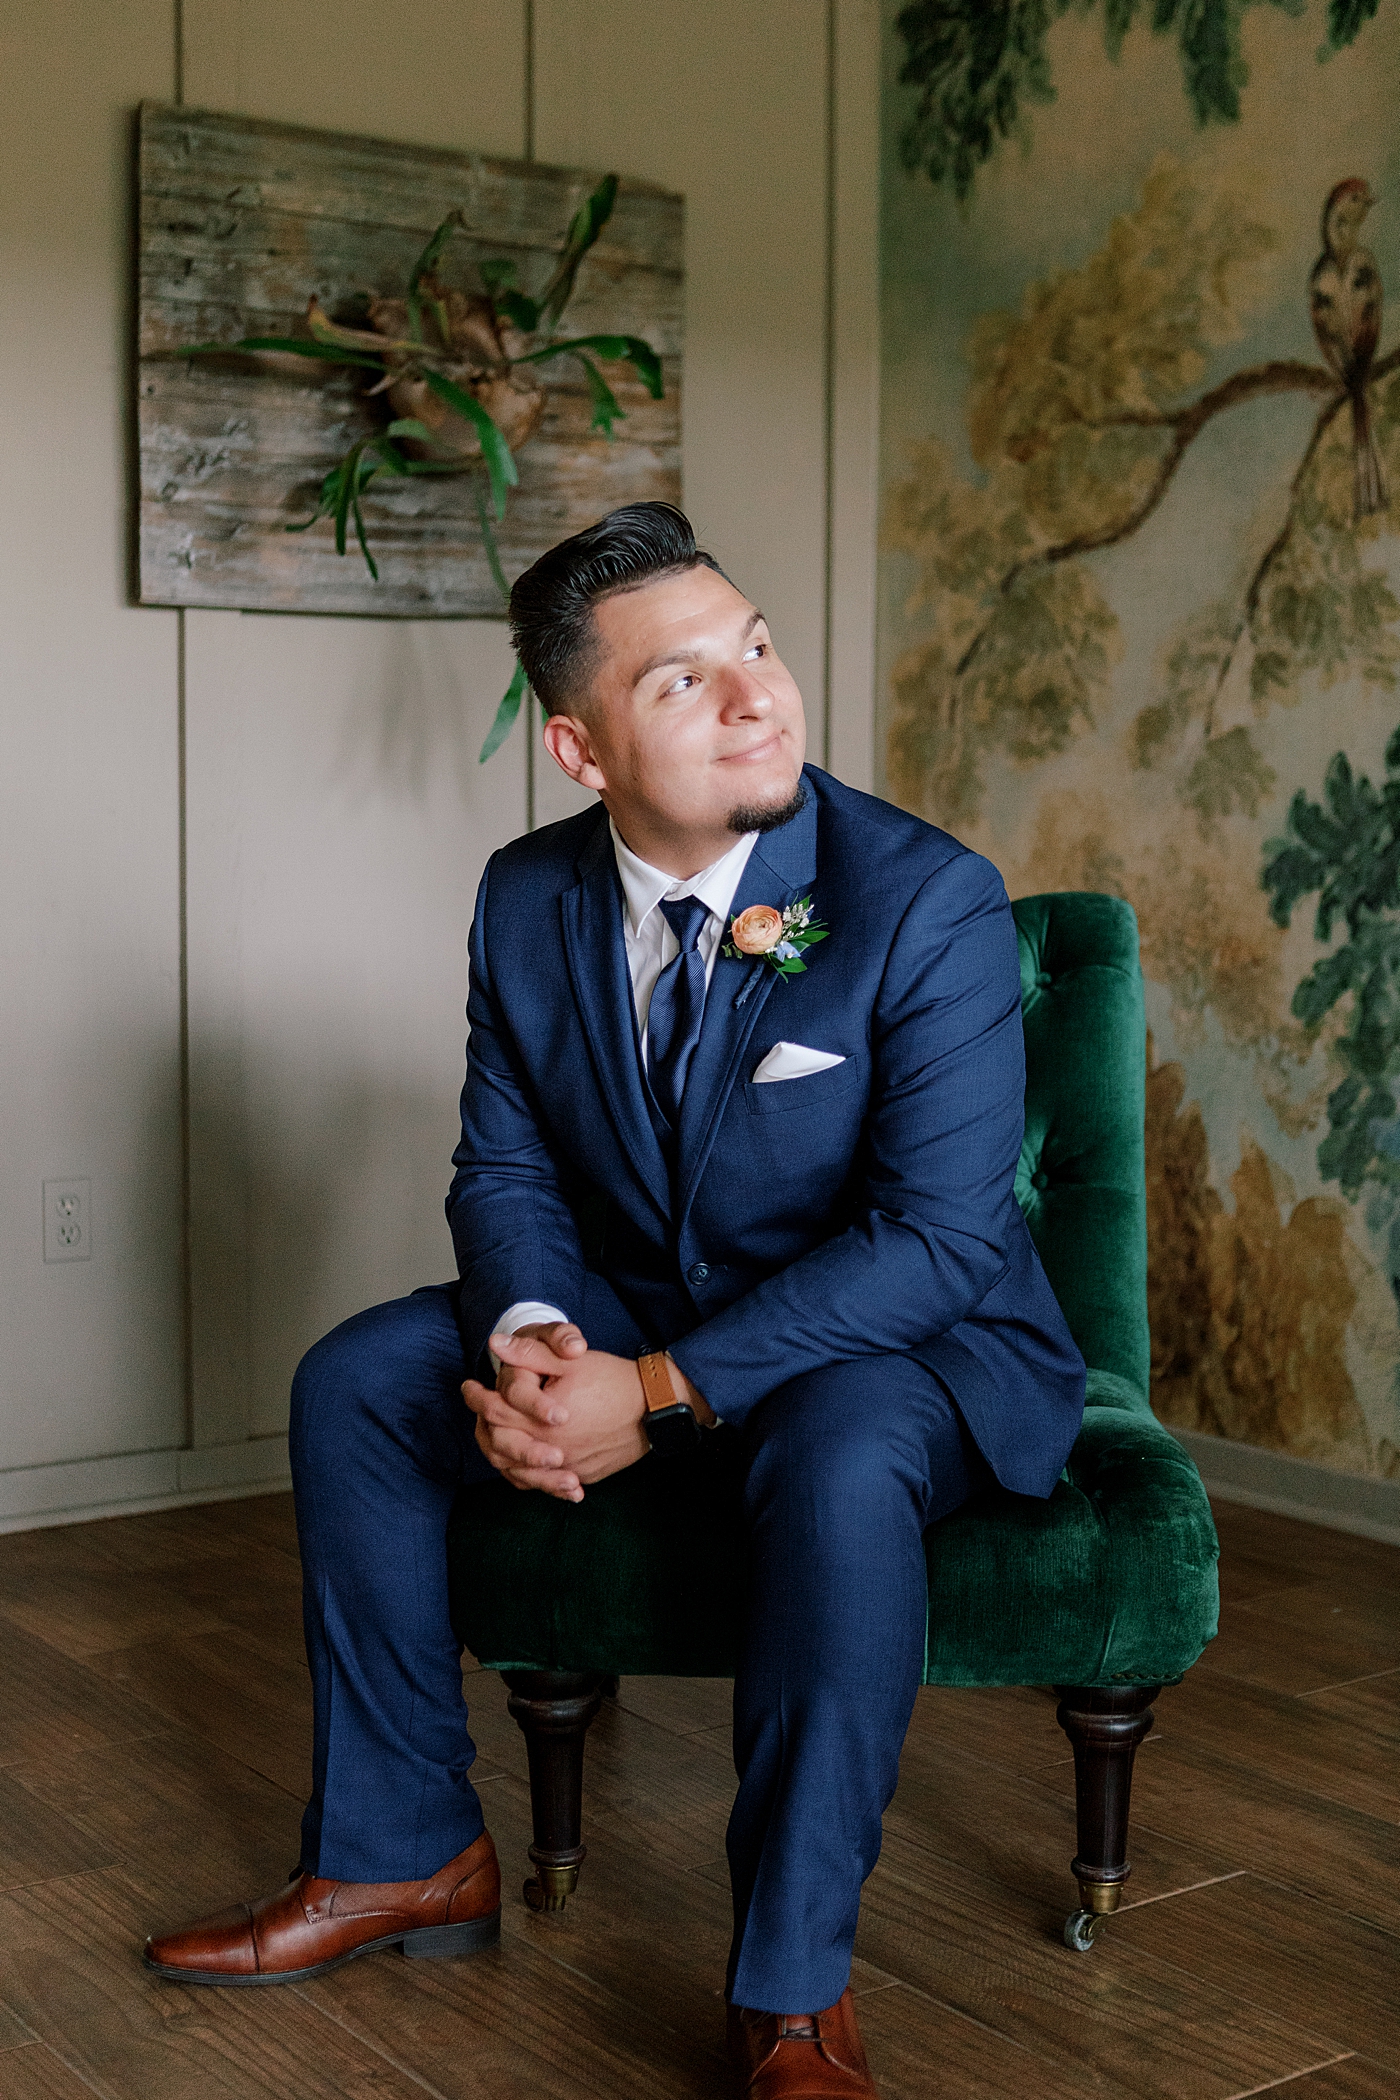 Groom smiling sitting in a green chair | Image by Hope Helmuth Photography 